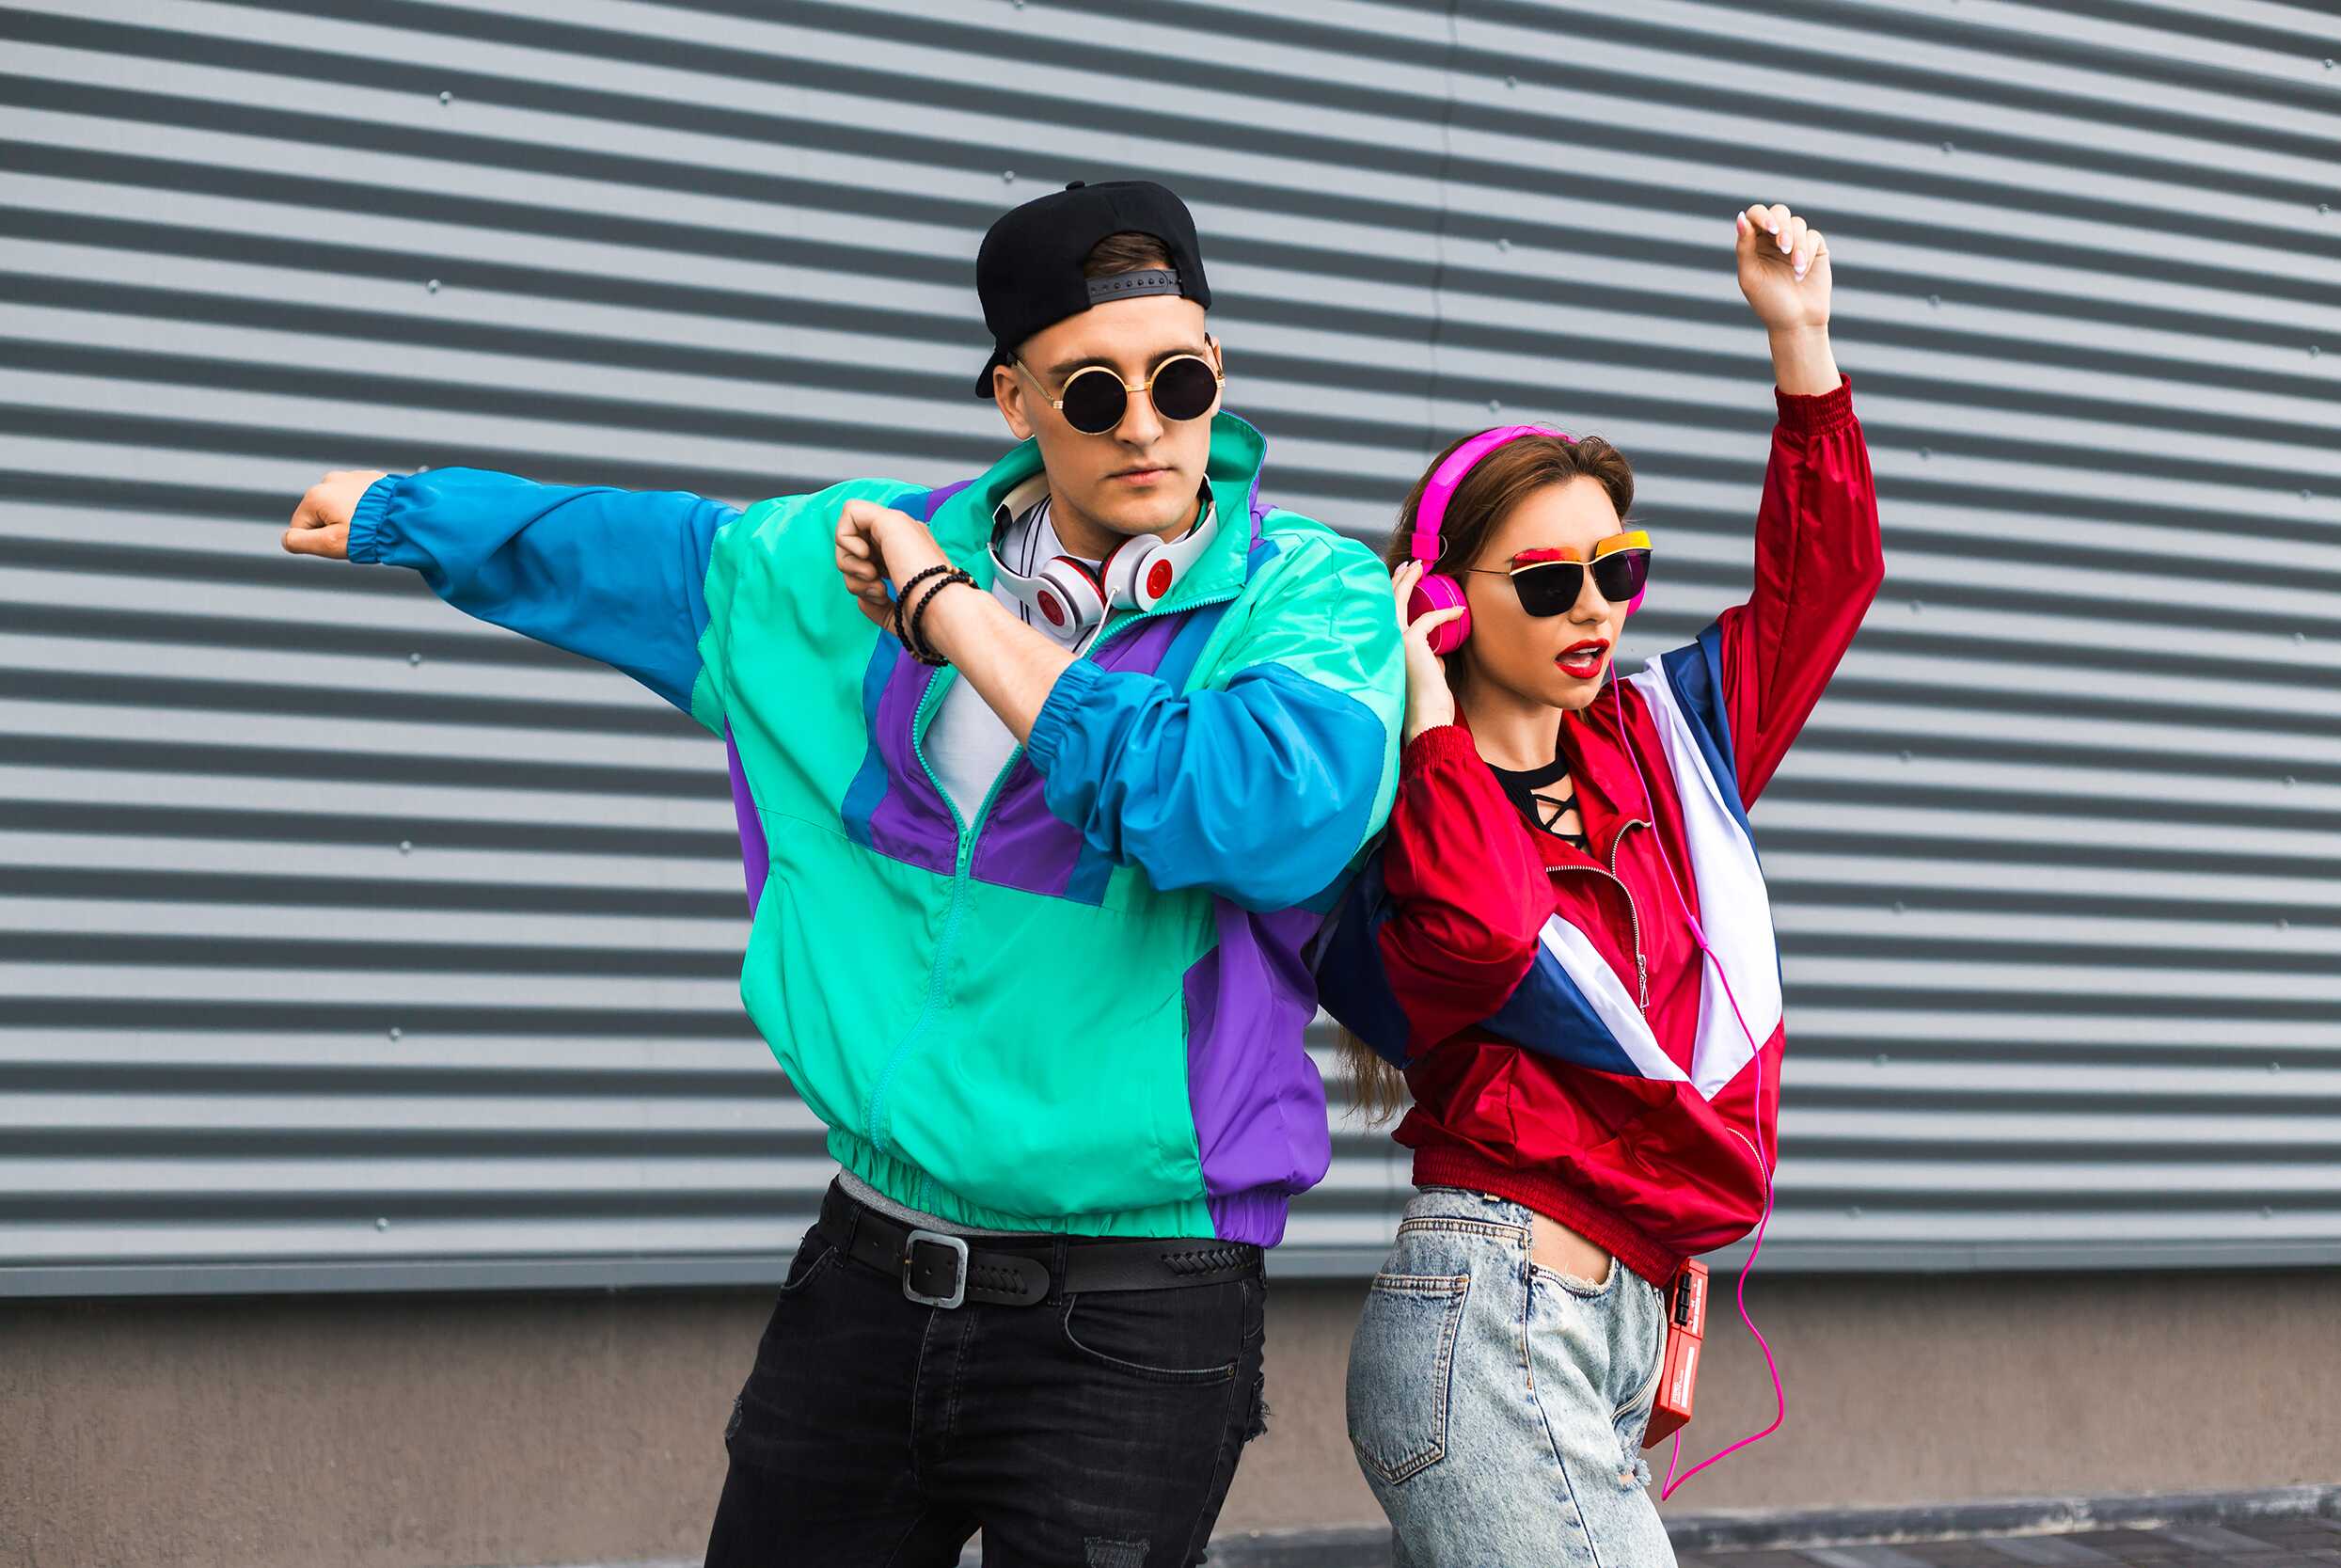 Get Ready for a Blast from the Past at Your 90s-Themed Party!